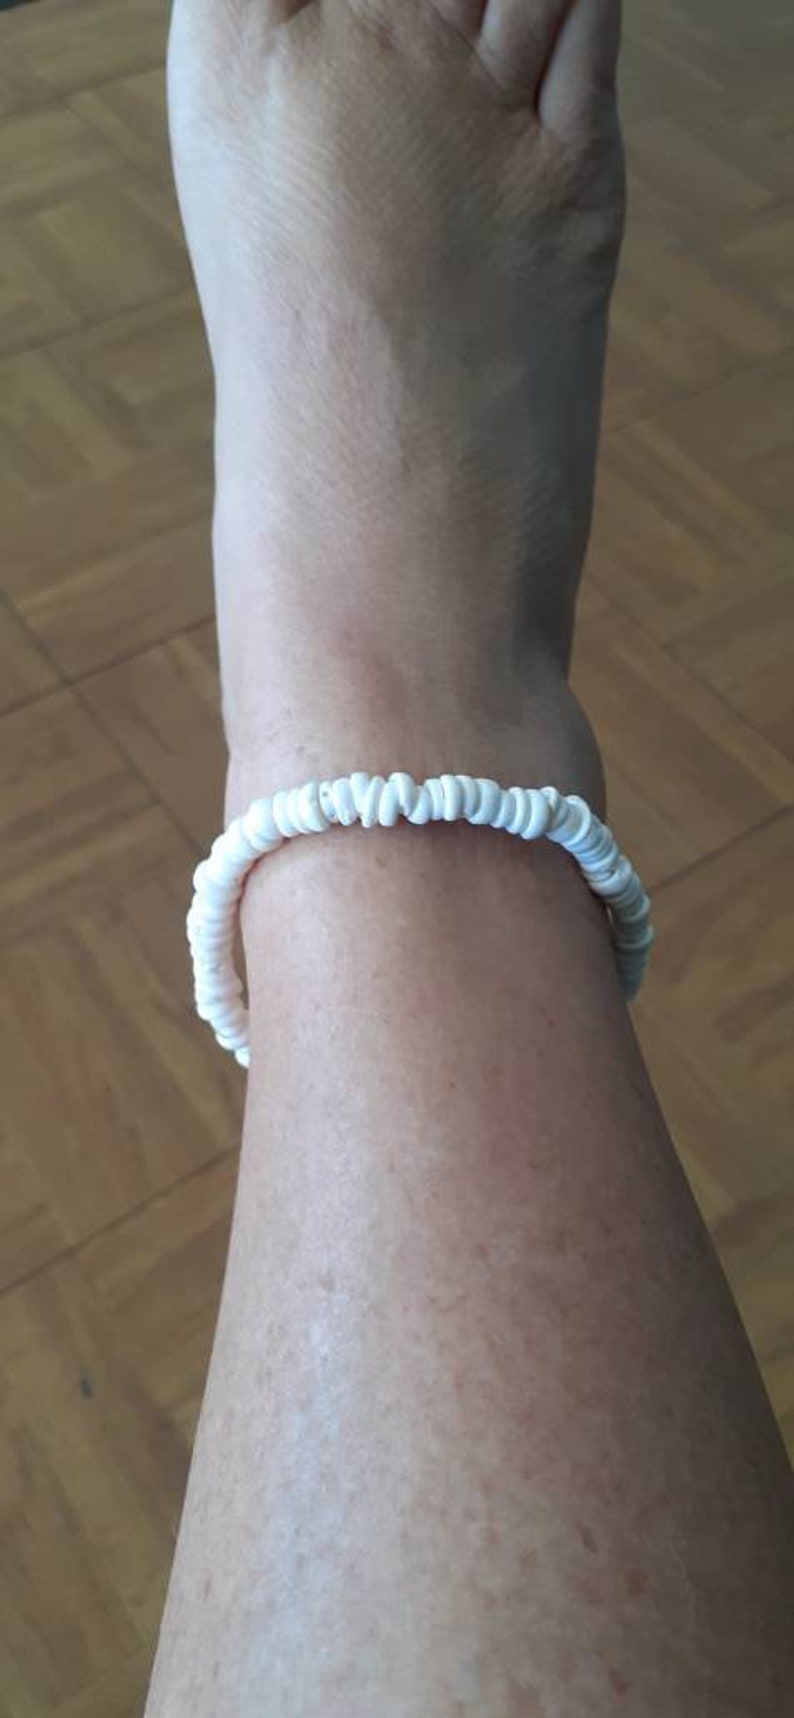 Puka Shell Anklet, Shell Anklet, Puka Anklet, Puka Jewelry, Shell Jewelry, Summer Jewelry, Anklet made from shell, White Shell Anklet image 2